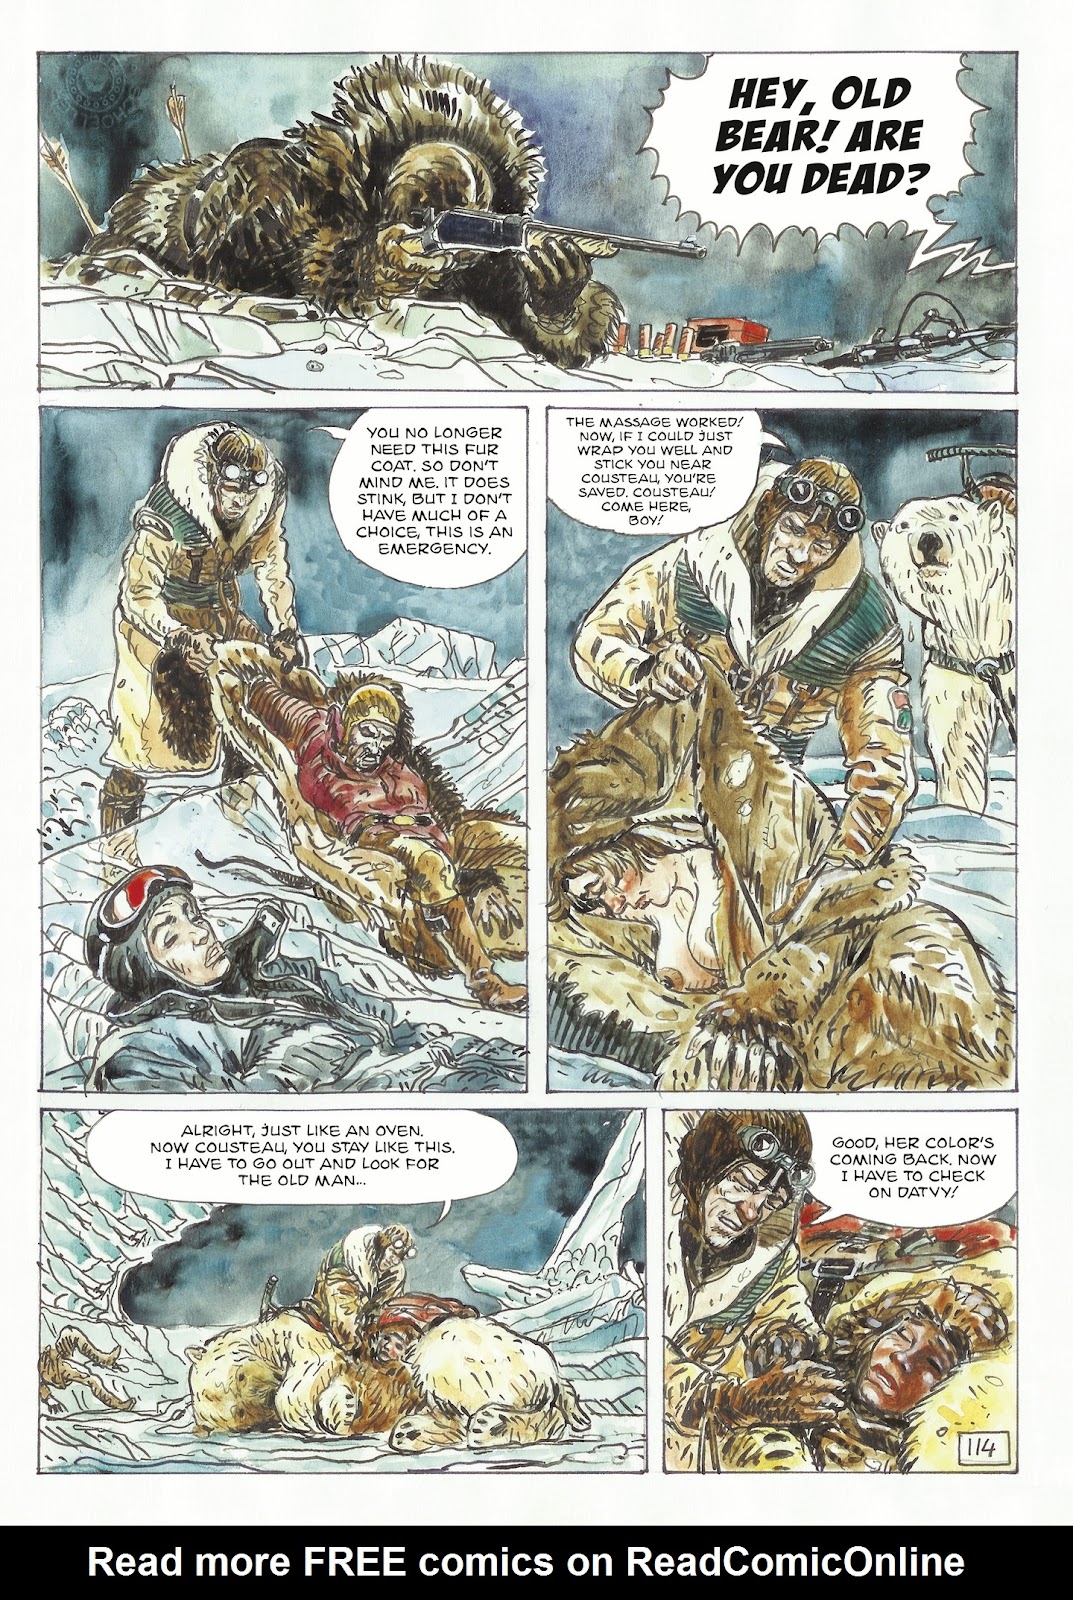 The Man With the Bear issue 2 - Page 60